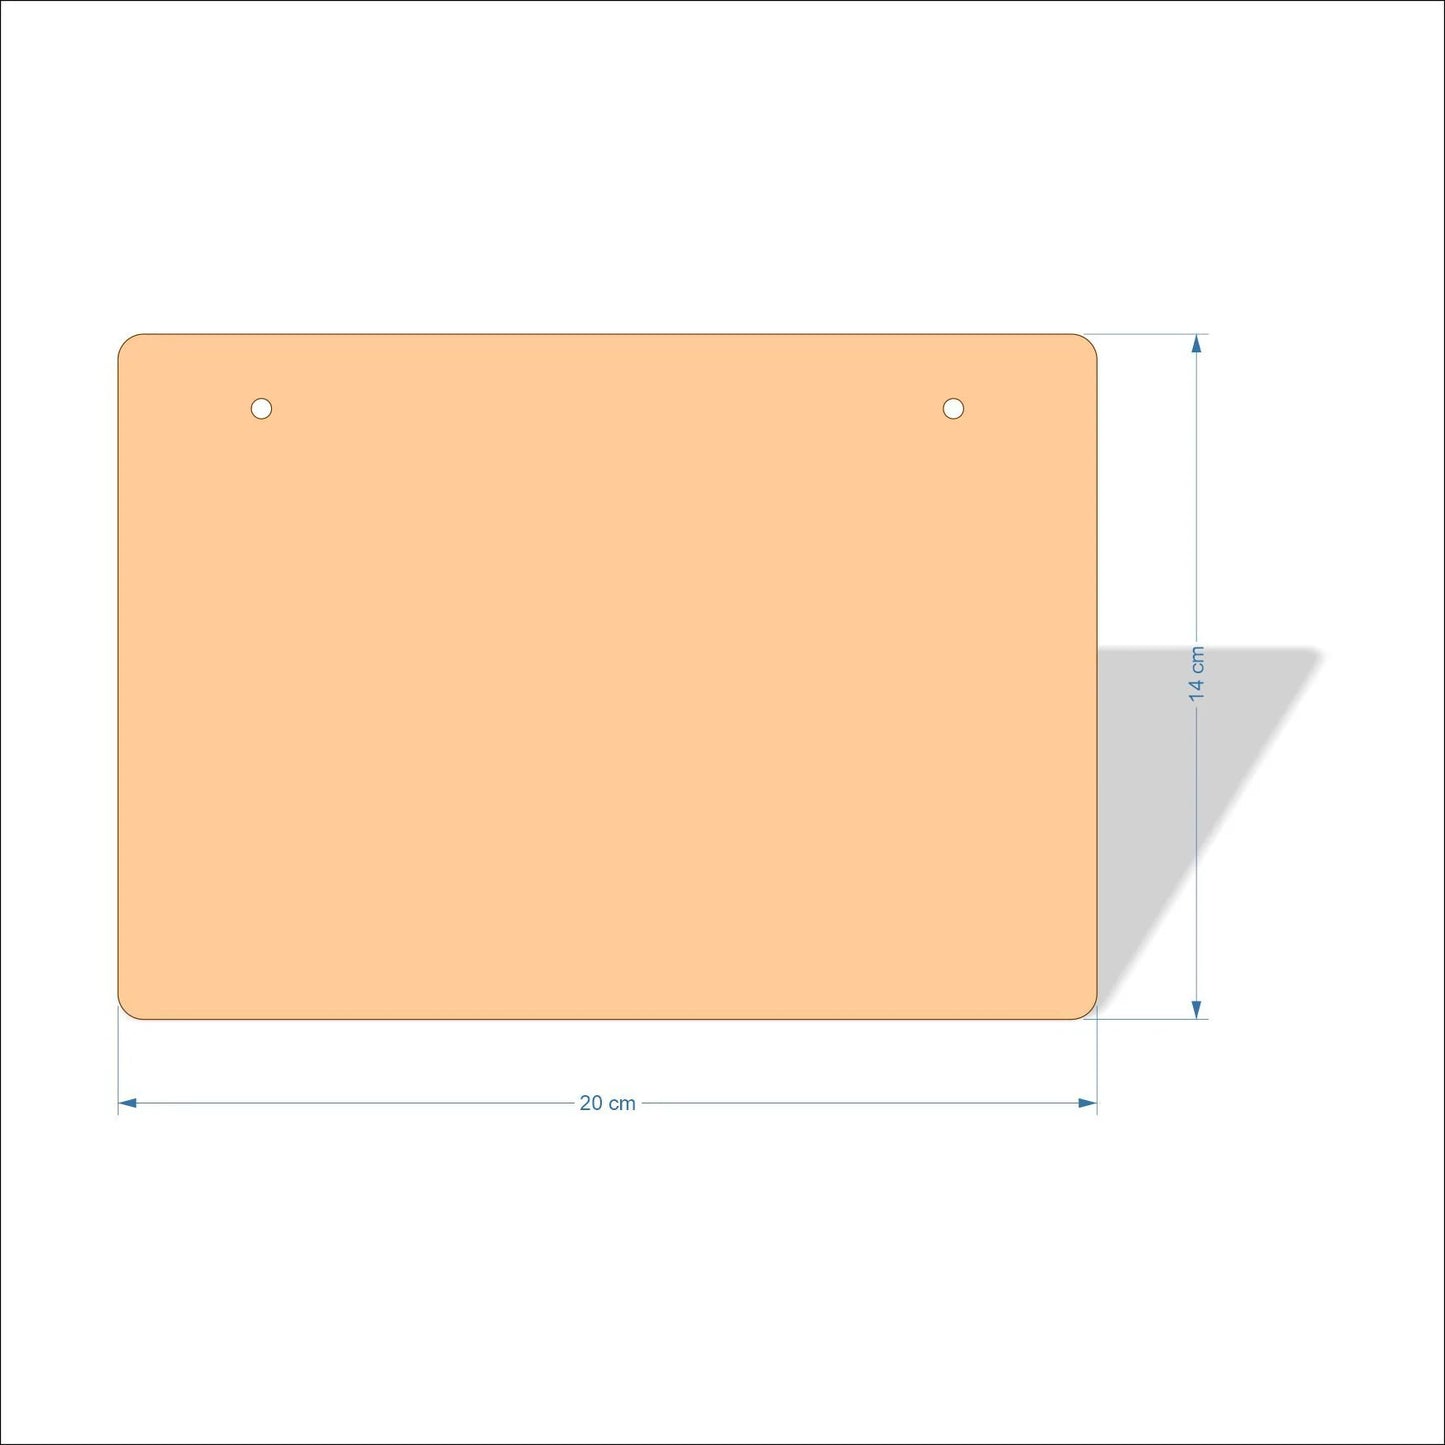 20 cm X 14 cm 4mm poplar plywood Plaques with rounded corners